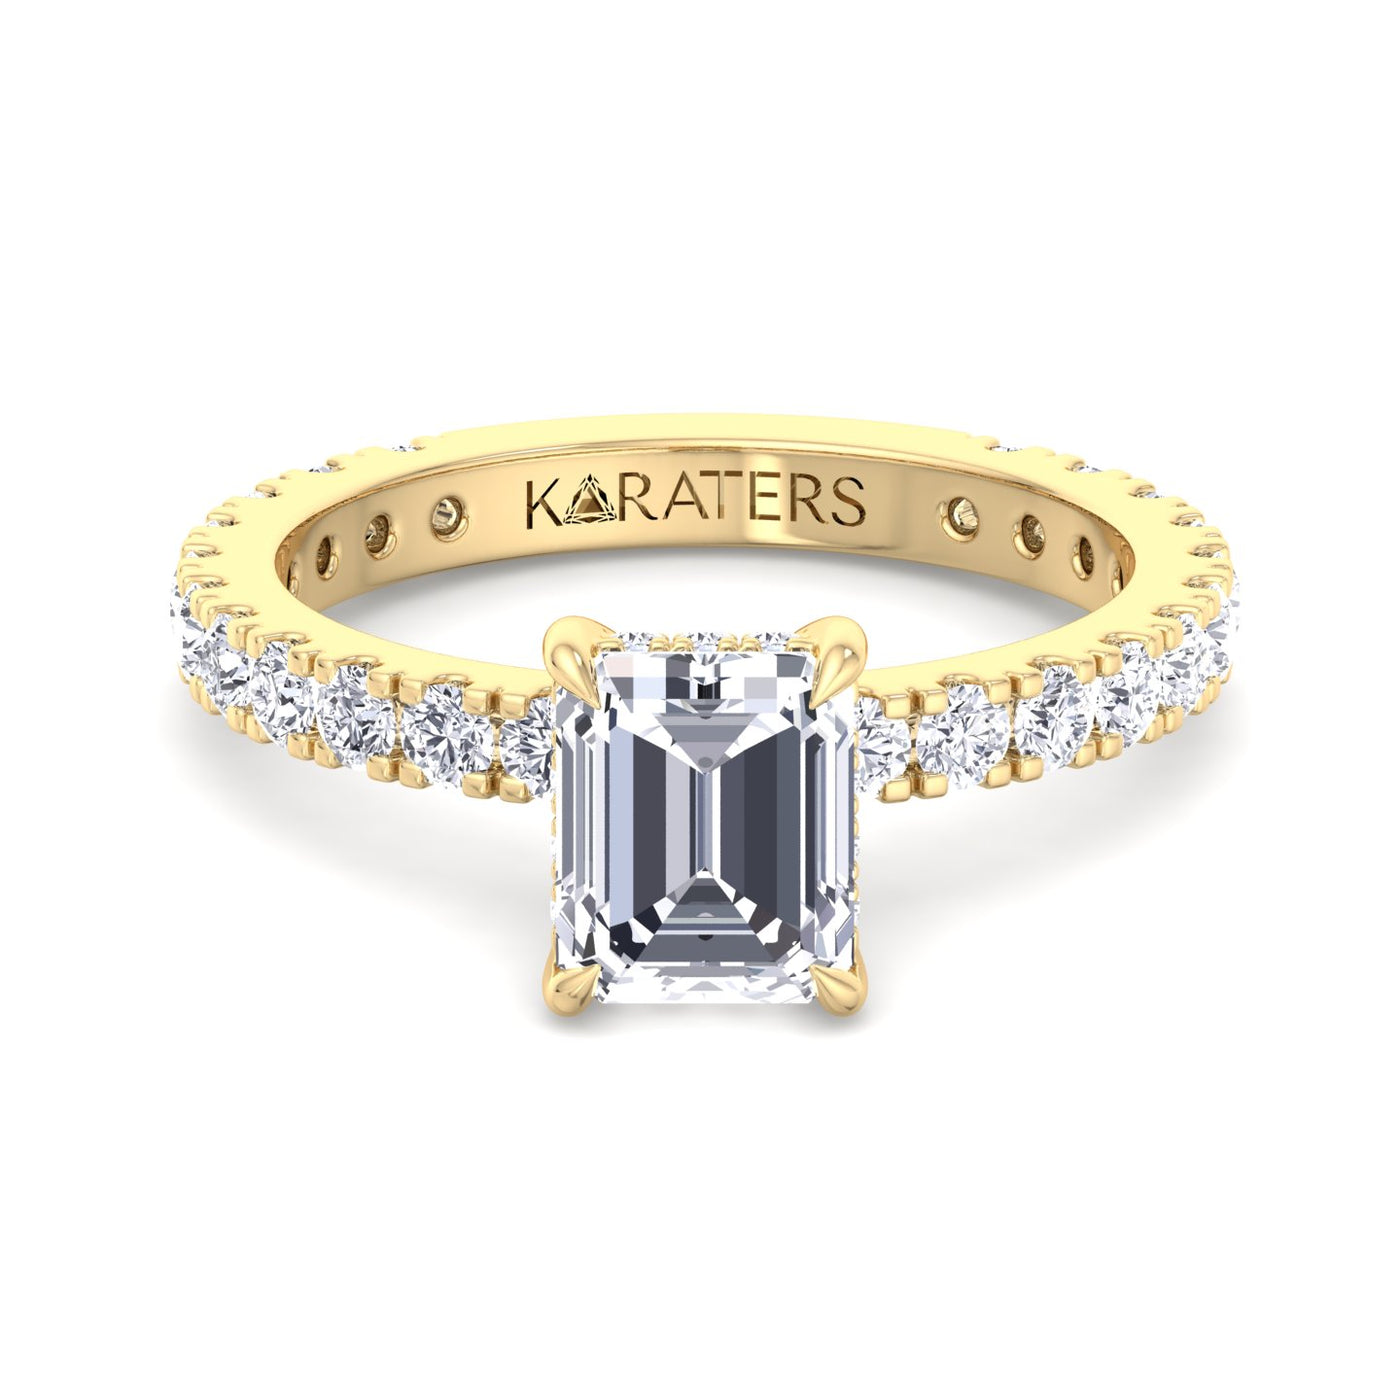 emerald-cut-lab-grown-diamond-engagement-ring-with-hidden-halo-side-stones-in-yellow-gold